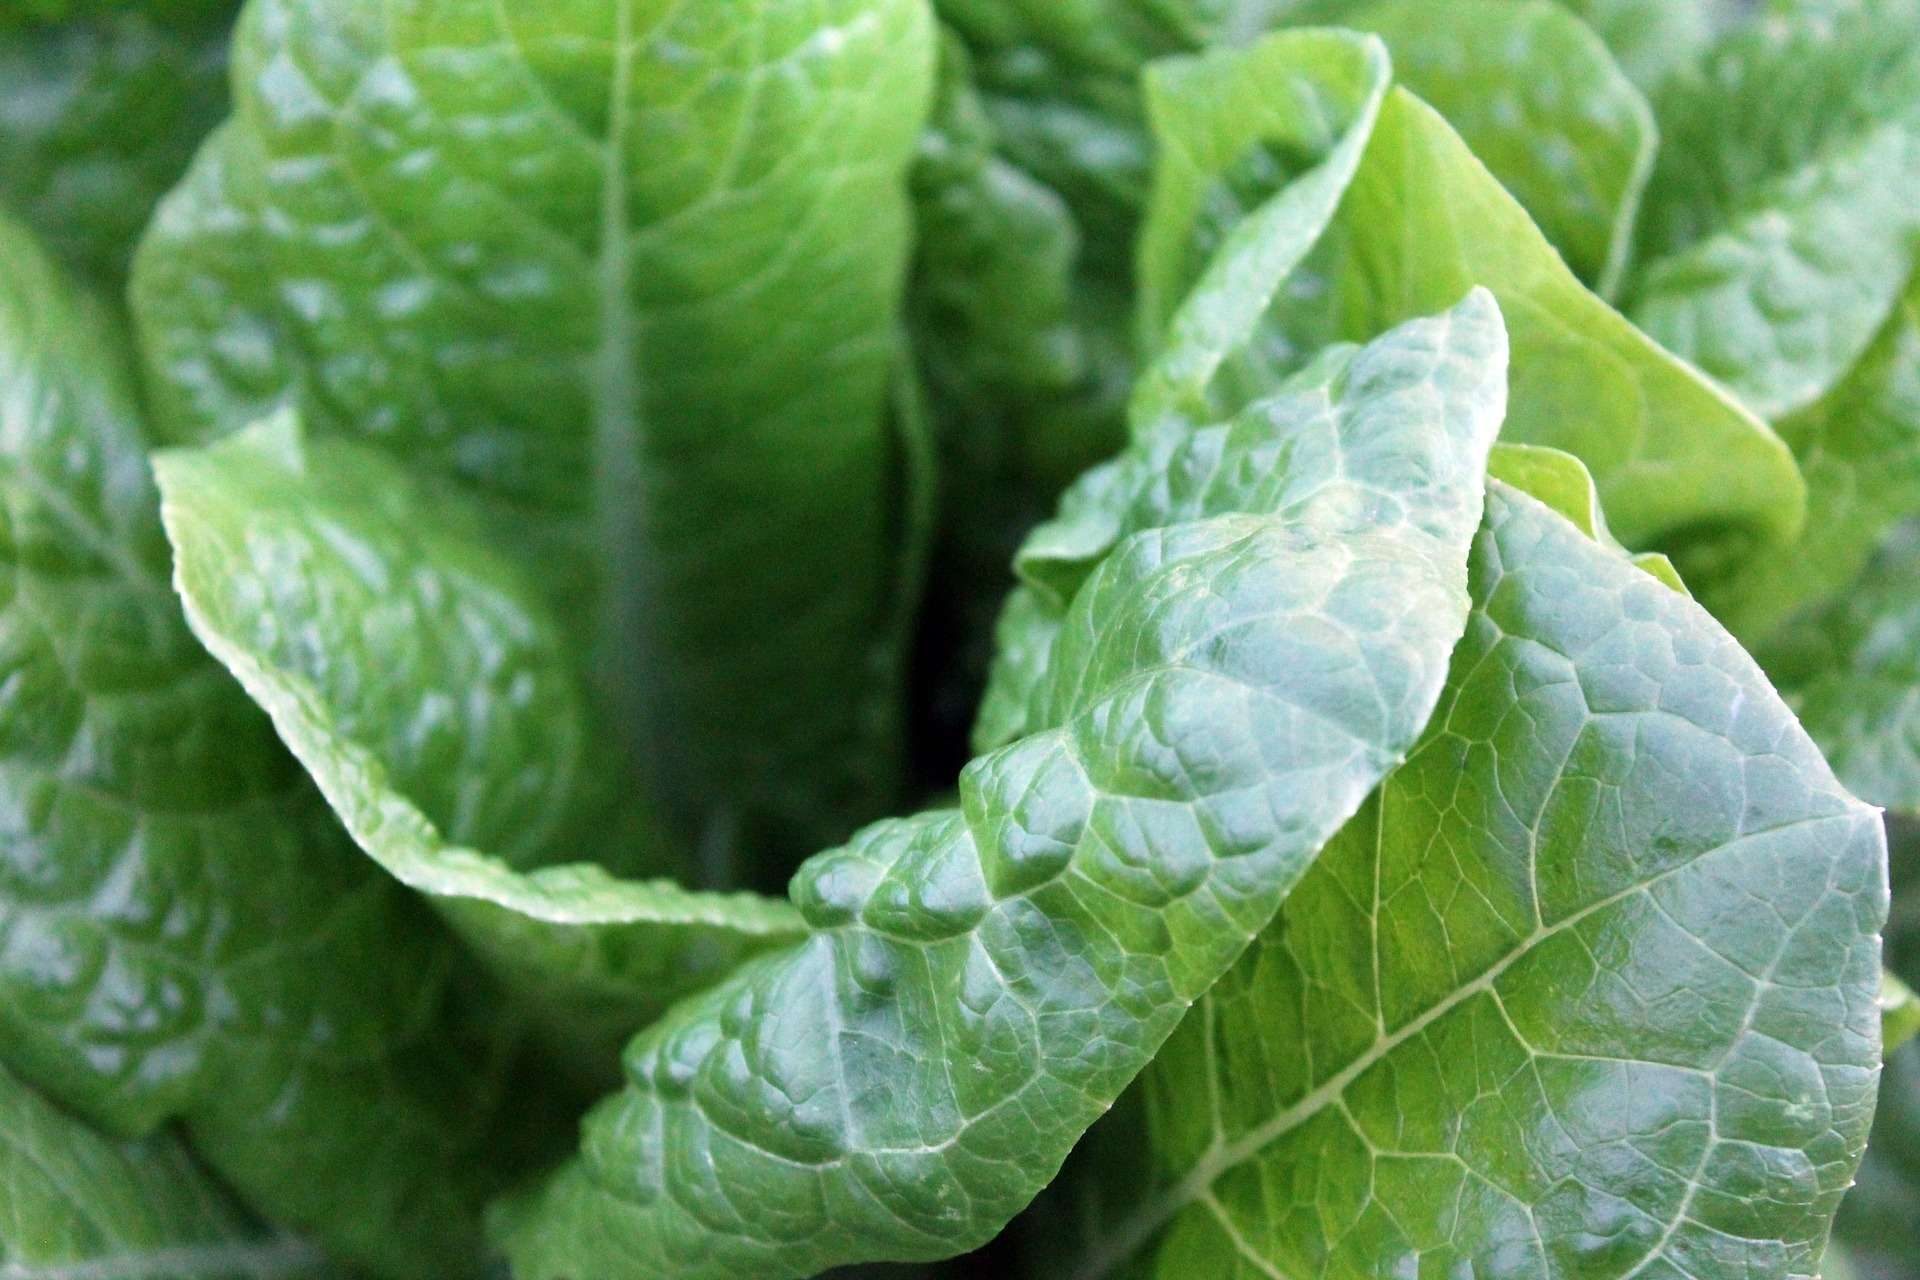 Spinach leaves detect explosives